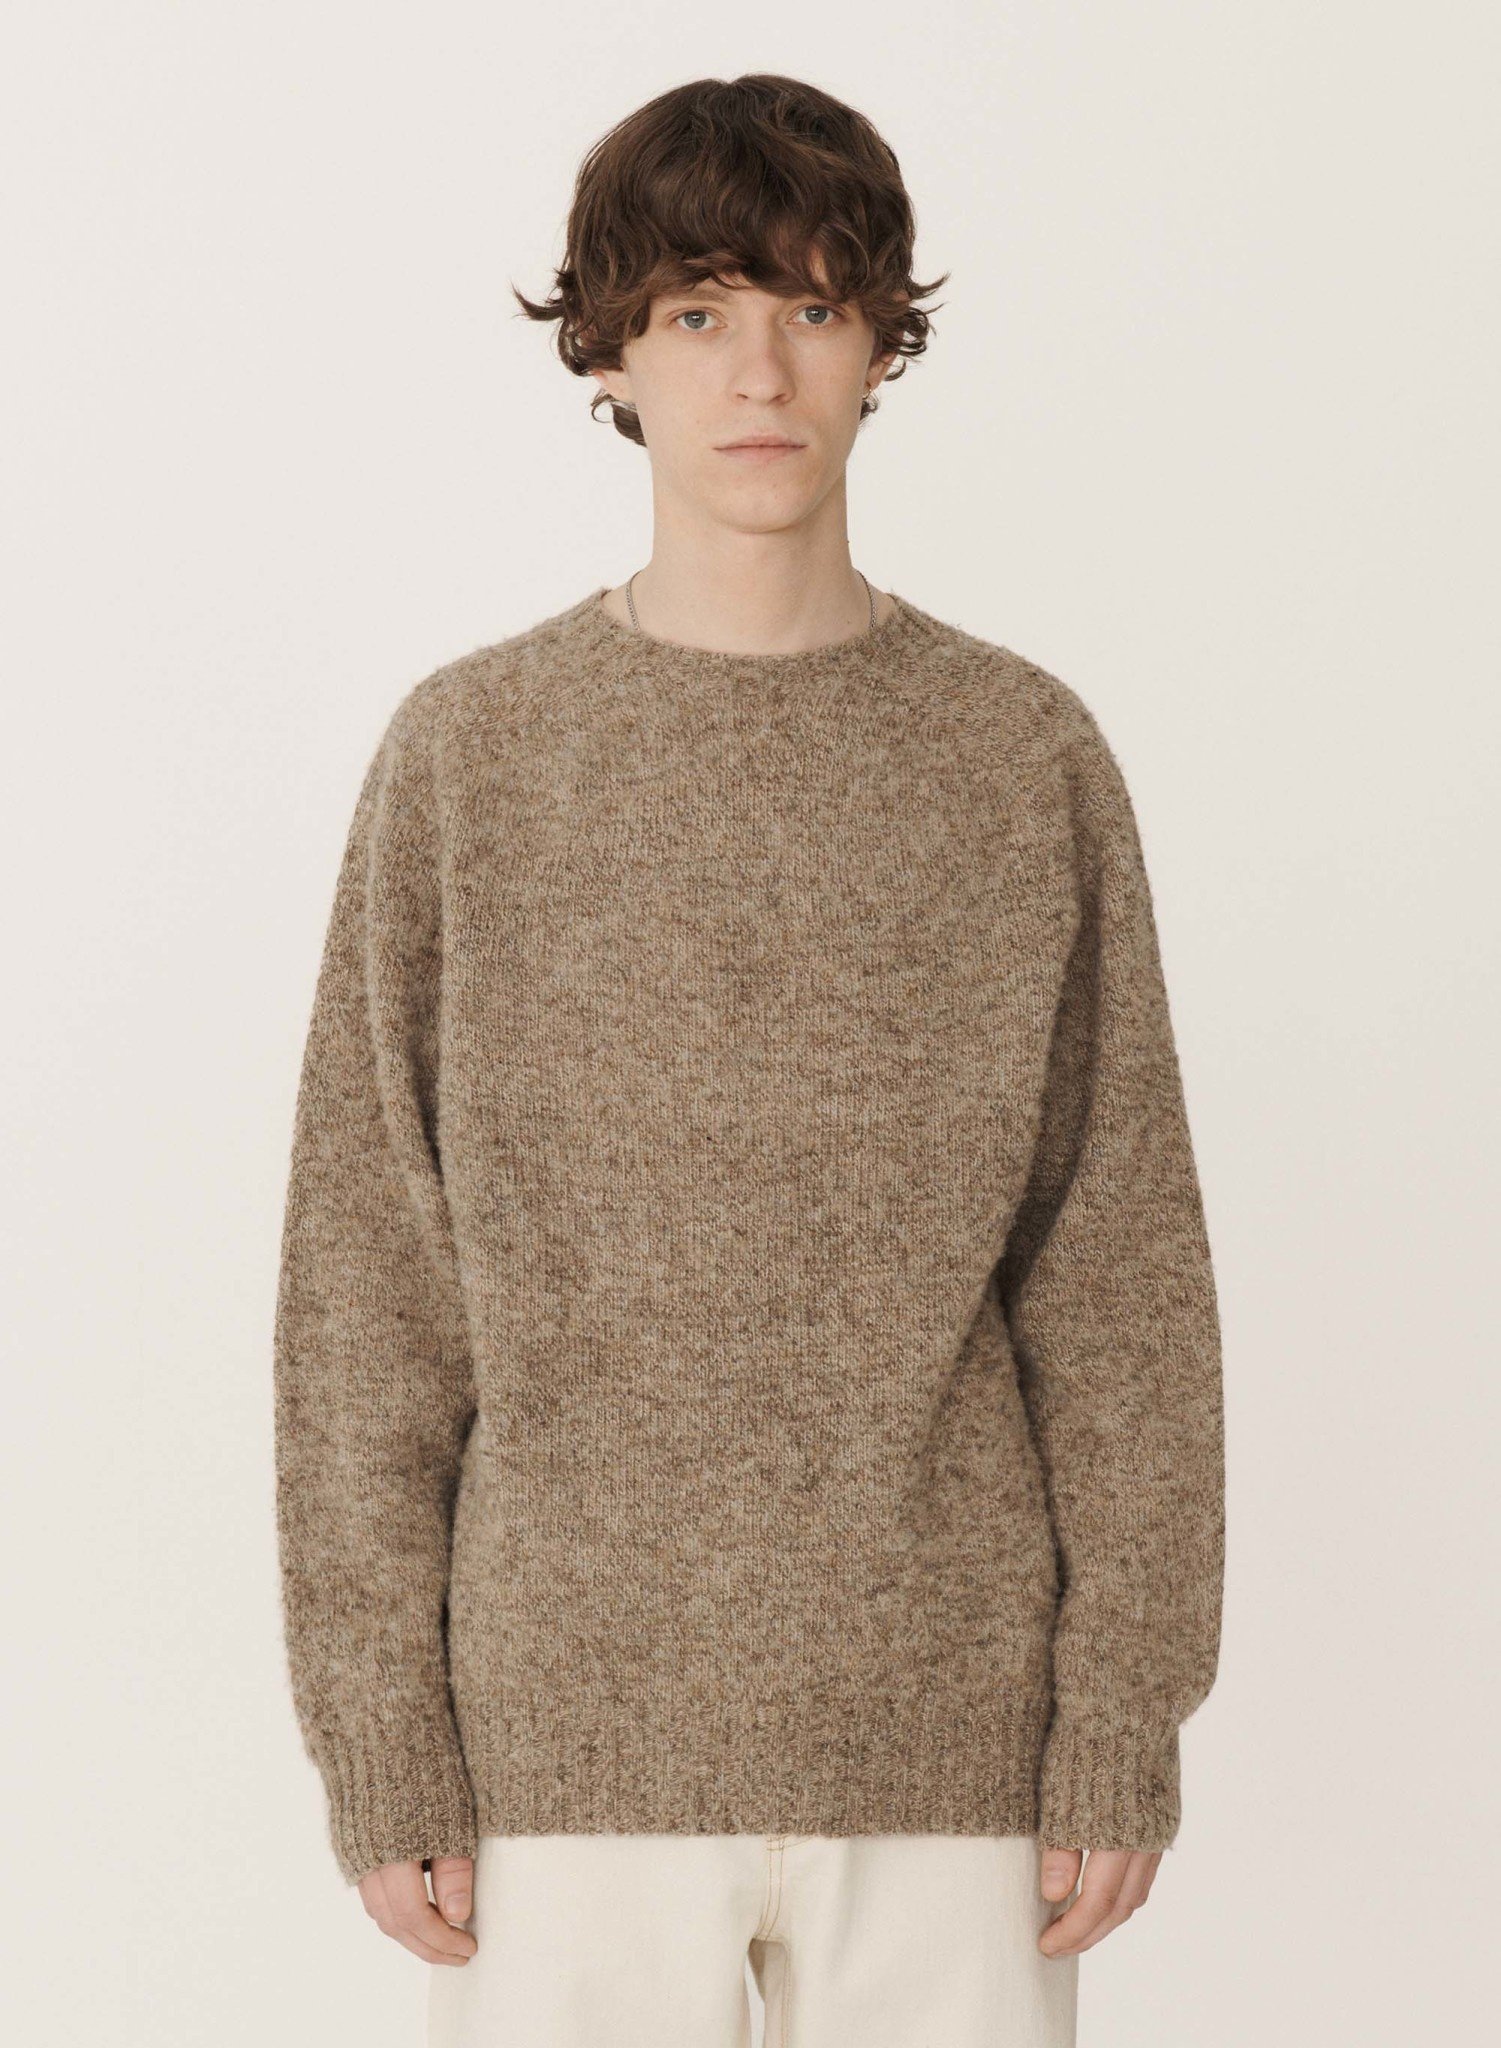 Suedehead Crew Neck Knit in Natural - Eastwood Ave. Menswear